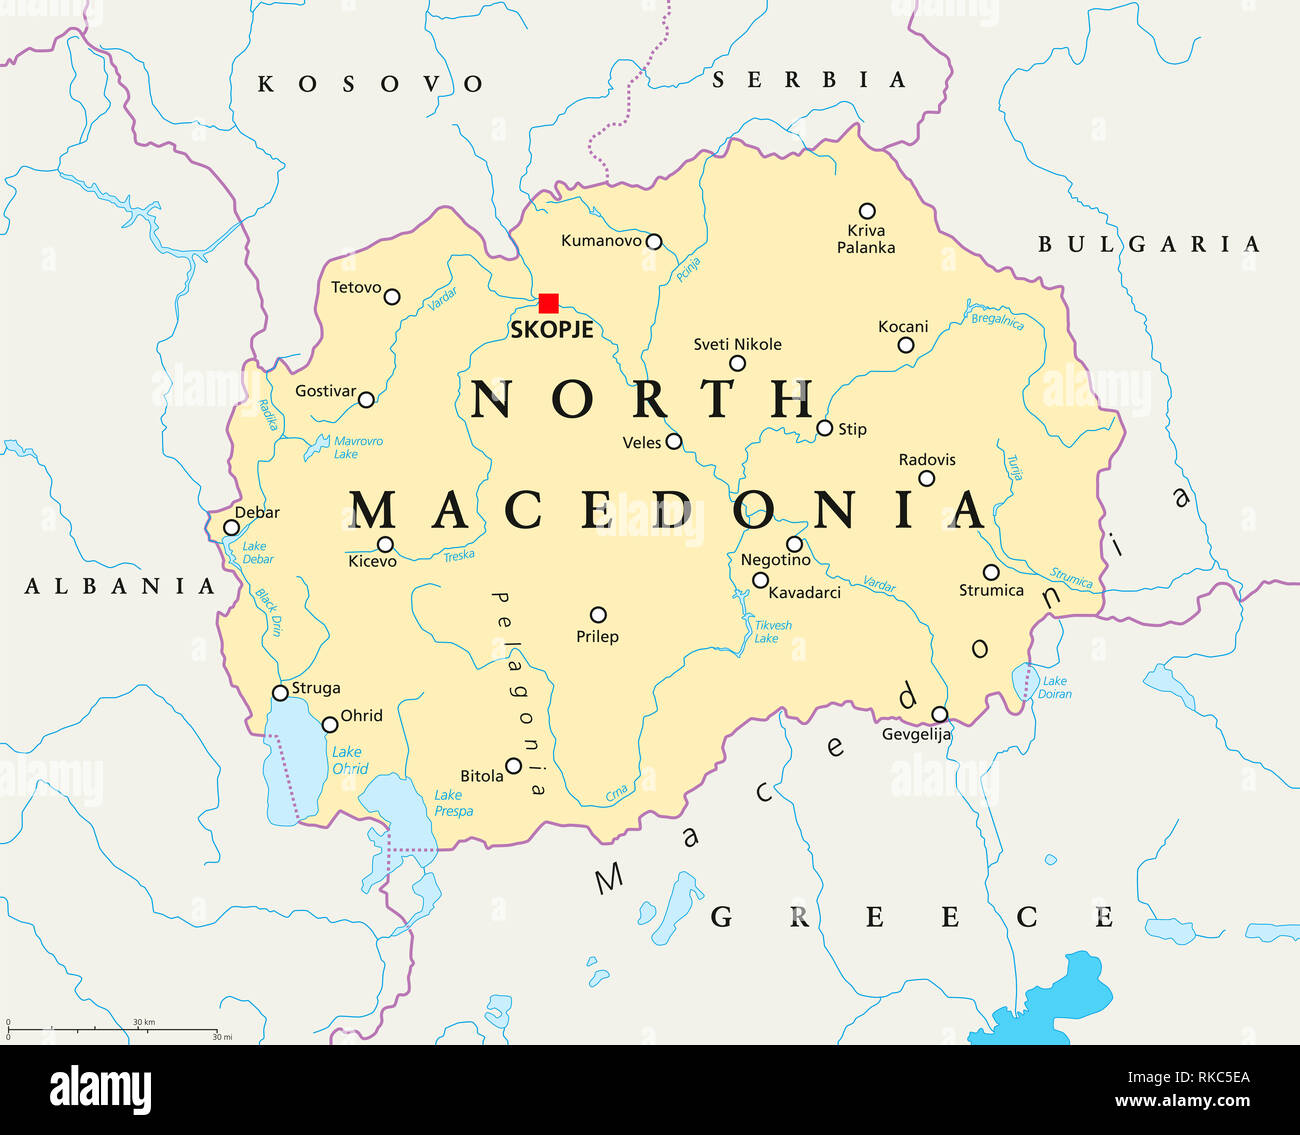 North Macedonia political map with capital Skopje, borders, important cities, rivers and lakes. Former Yugoslav Republic of Macedonia, renamed 2019. Stock Photo